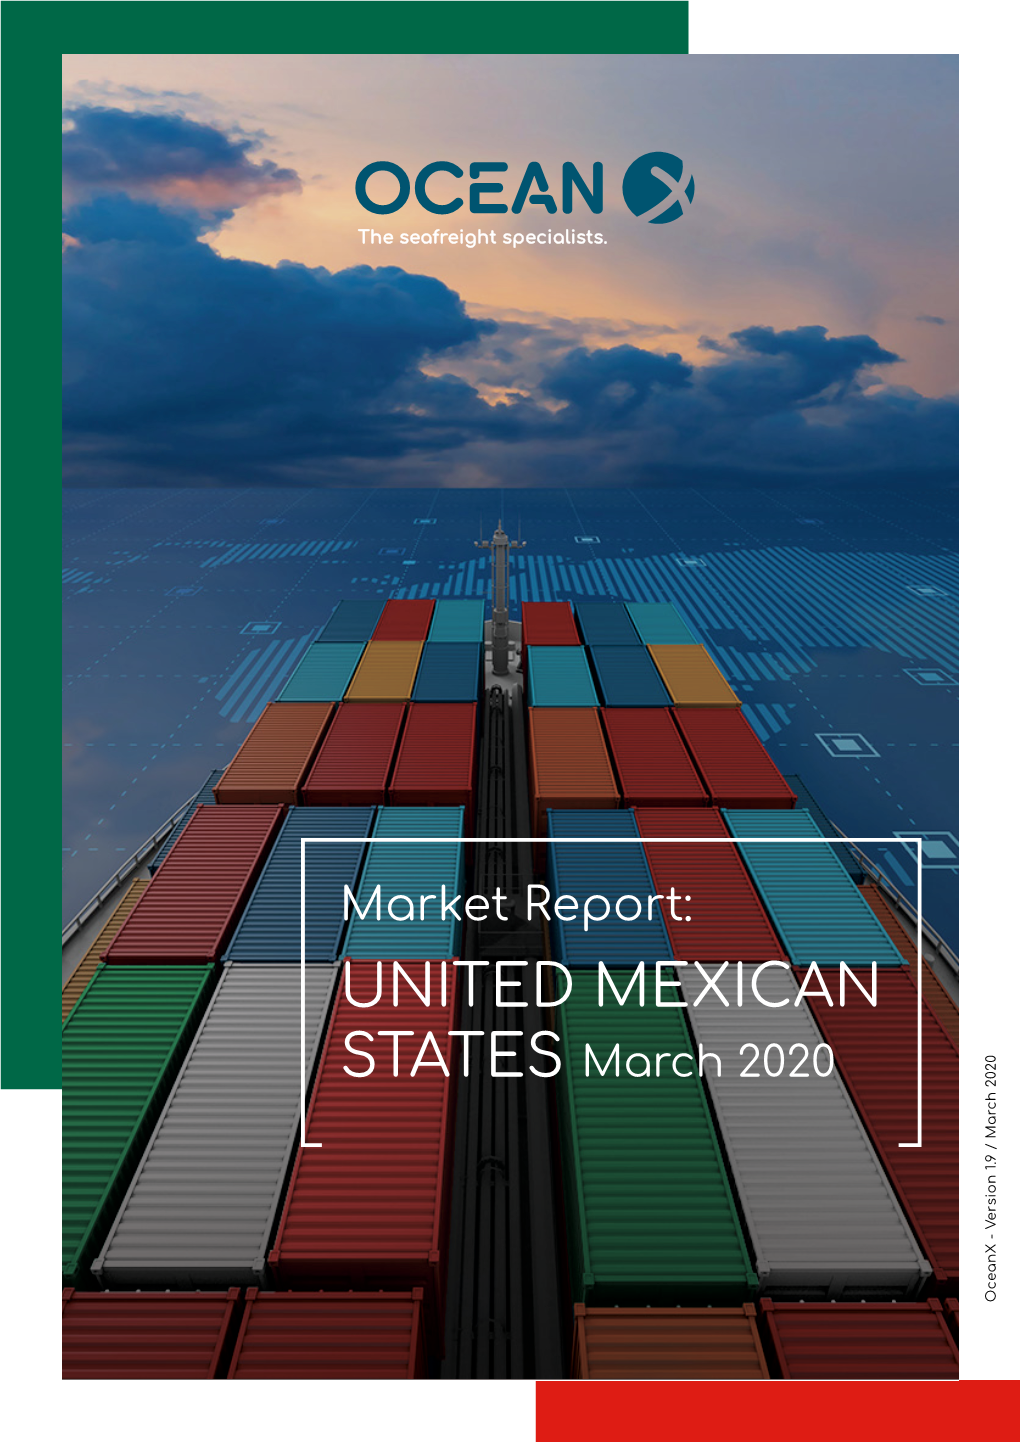 UNITED MEXICAN Market Report: STATES